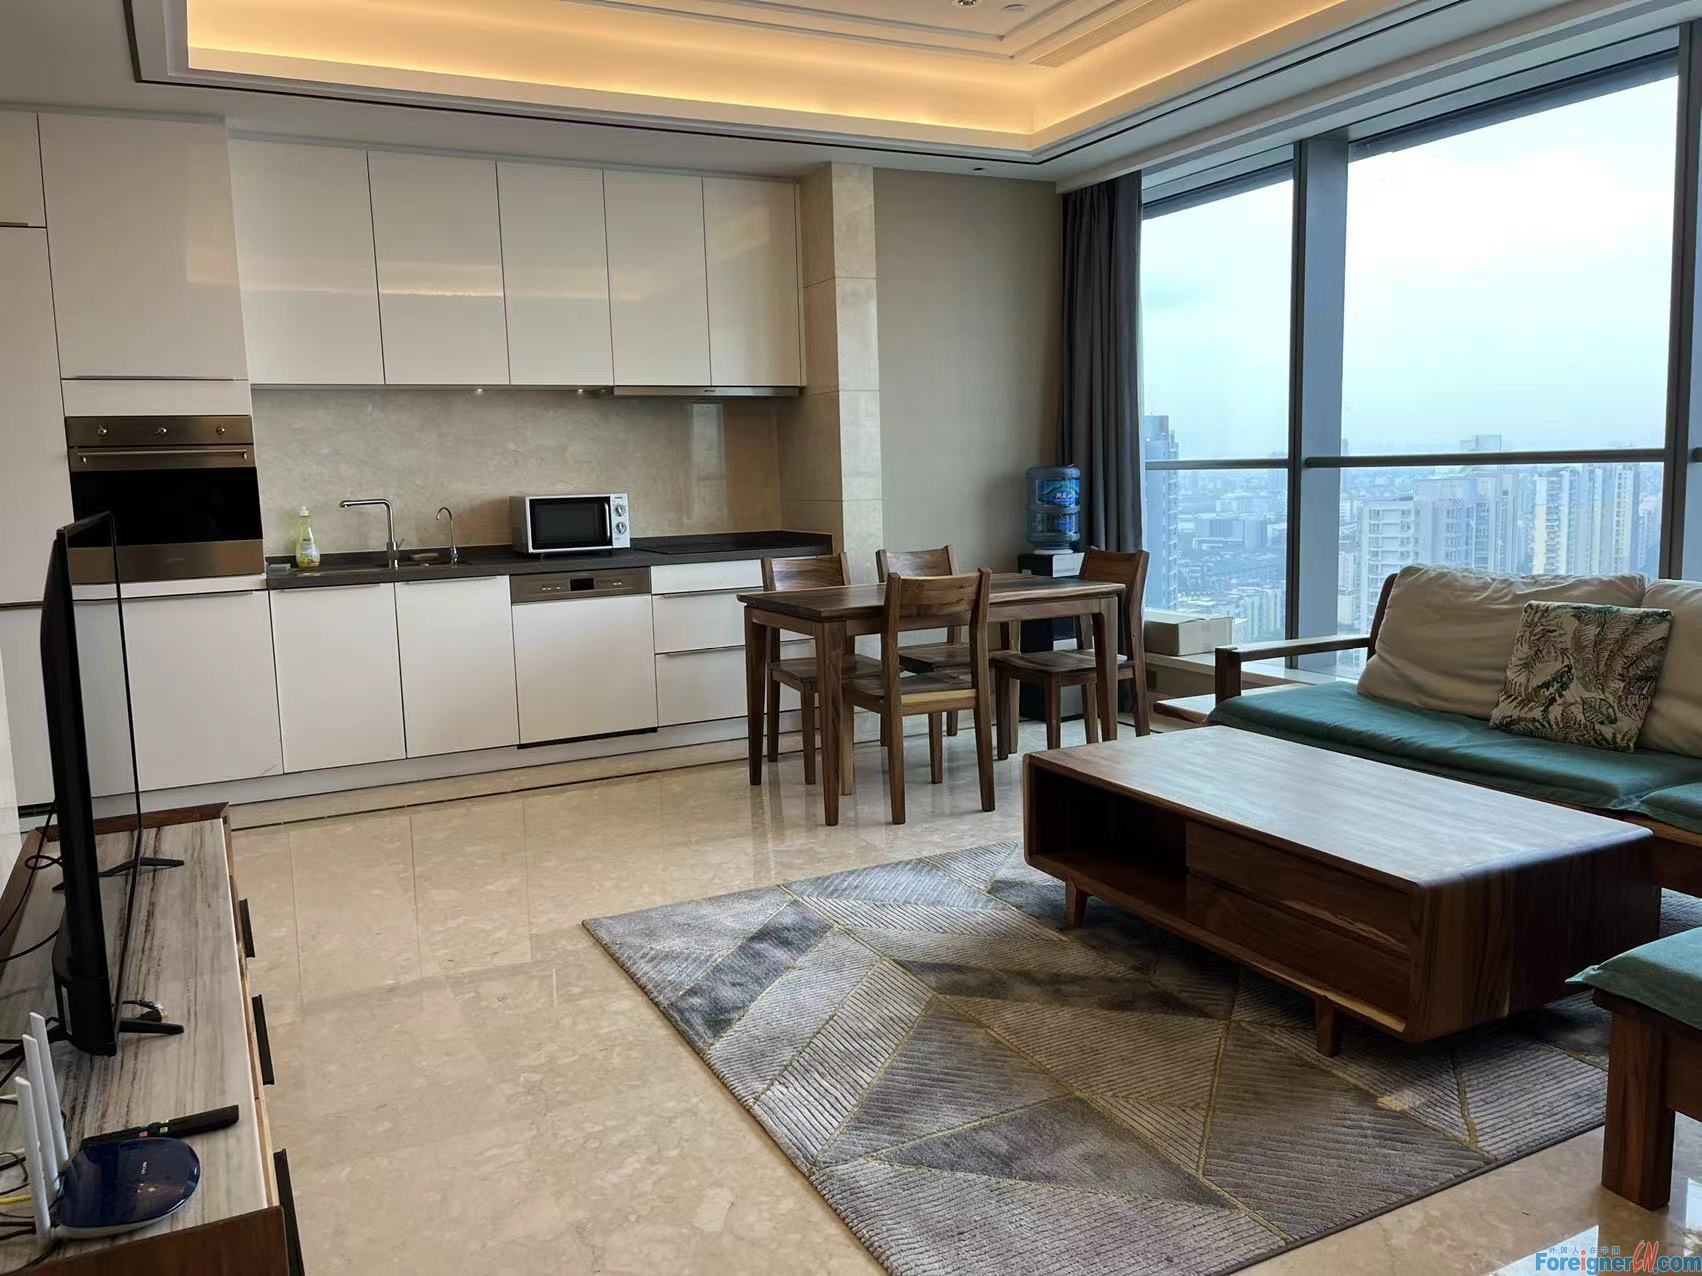 Fabulous！！！Suzhou Center No.9 apartment to rent/2 bedrooms and 2 bathroom/High floor/Central AC /Amazing lake view & city view/Suzhou Center shopping mall 